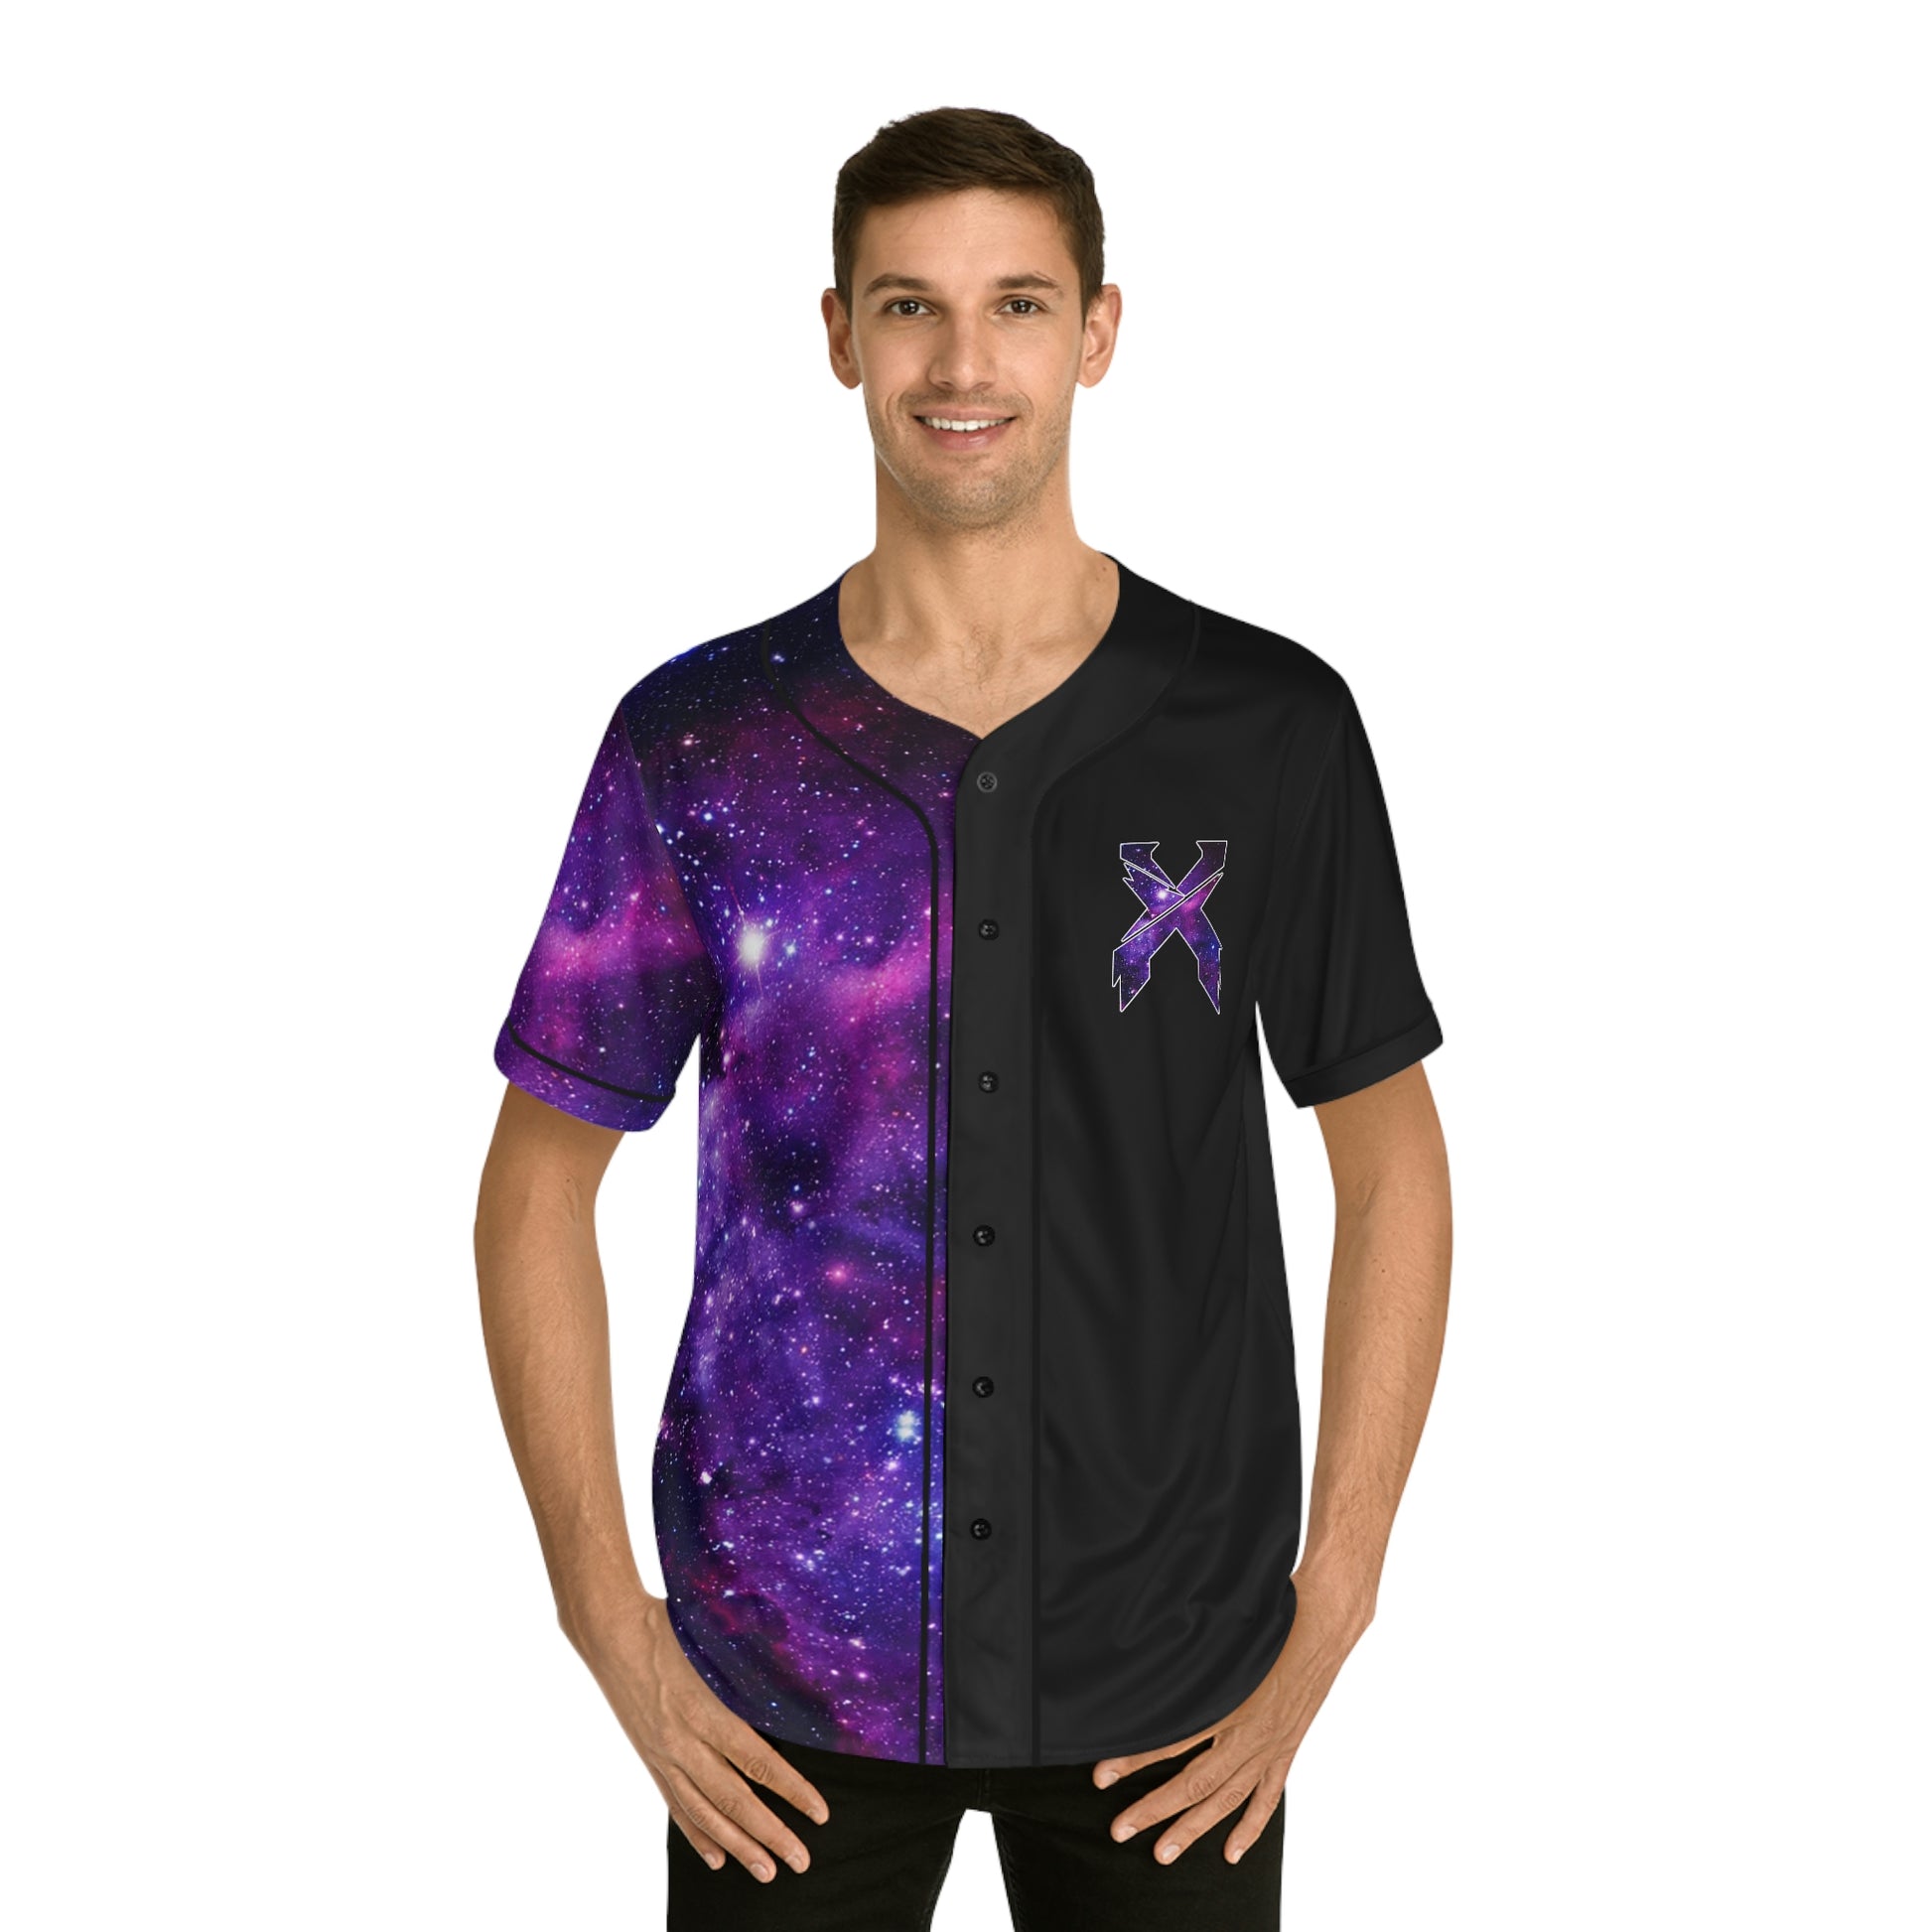 Excision red and blue galactic split rave jersey for Edm festivals - Rave  Jersey